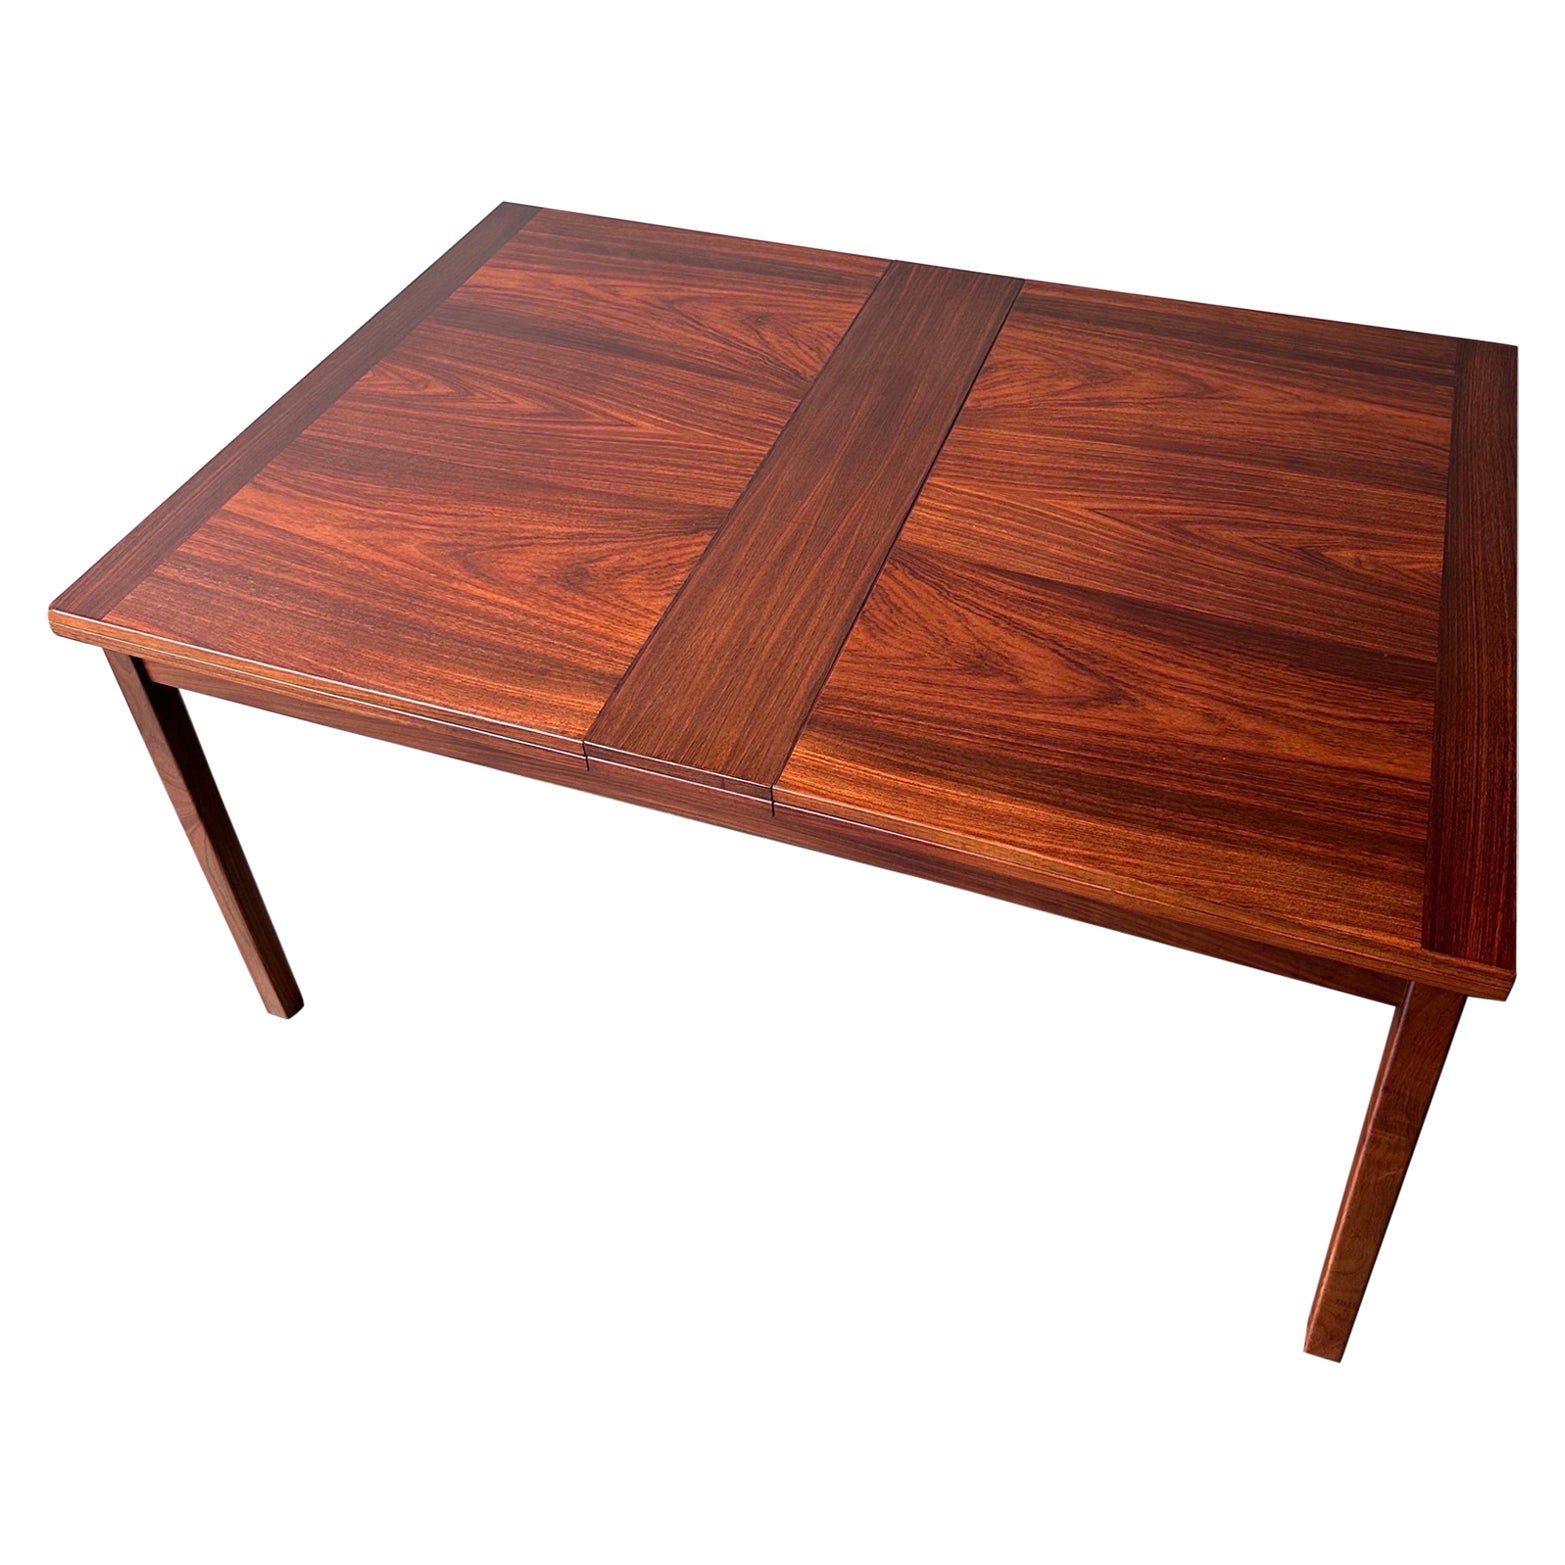 Rosewood mcm flip top dining table by Skaraborgs Sweden 